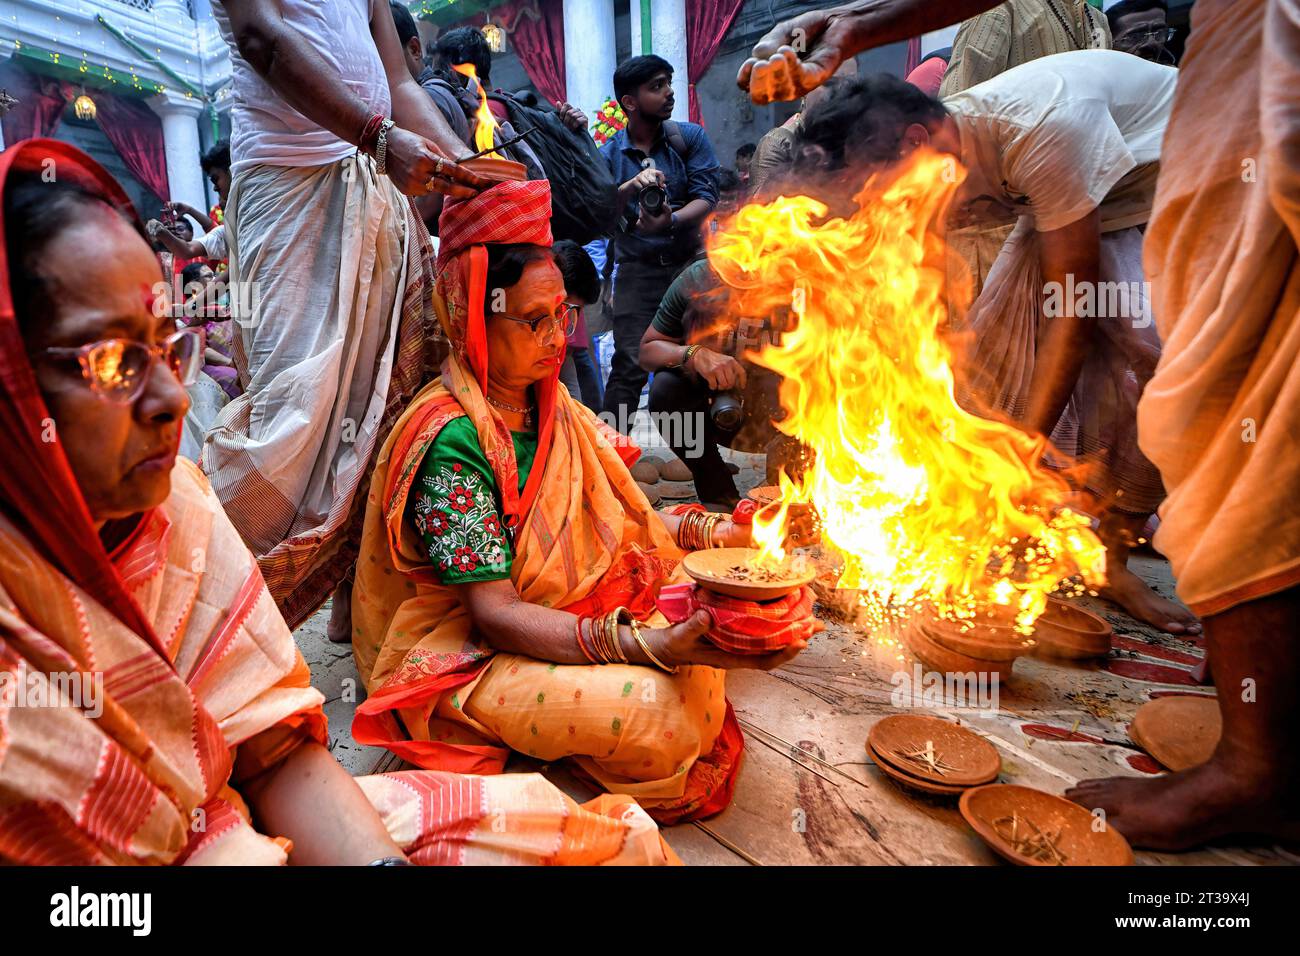 Kolkata, India. 22nd Oct, 2023. An Indian Hindu woman sits with burning fire pots on her hands and head as part of their ritual practice which includes blind faith and superstition to overcome every difficulties in coming future during the Maha ashtami celebration on the 8th day of Durga puja. Durga puja is the biggest Hindu festival running for 9 days all over India. Credit: SOPA Images Limited/Alamy Live News Stock Photo